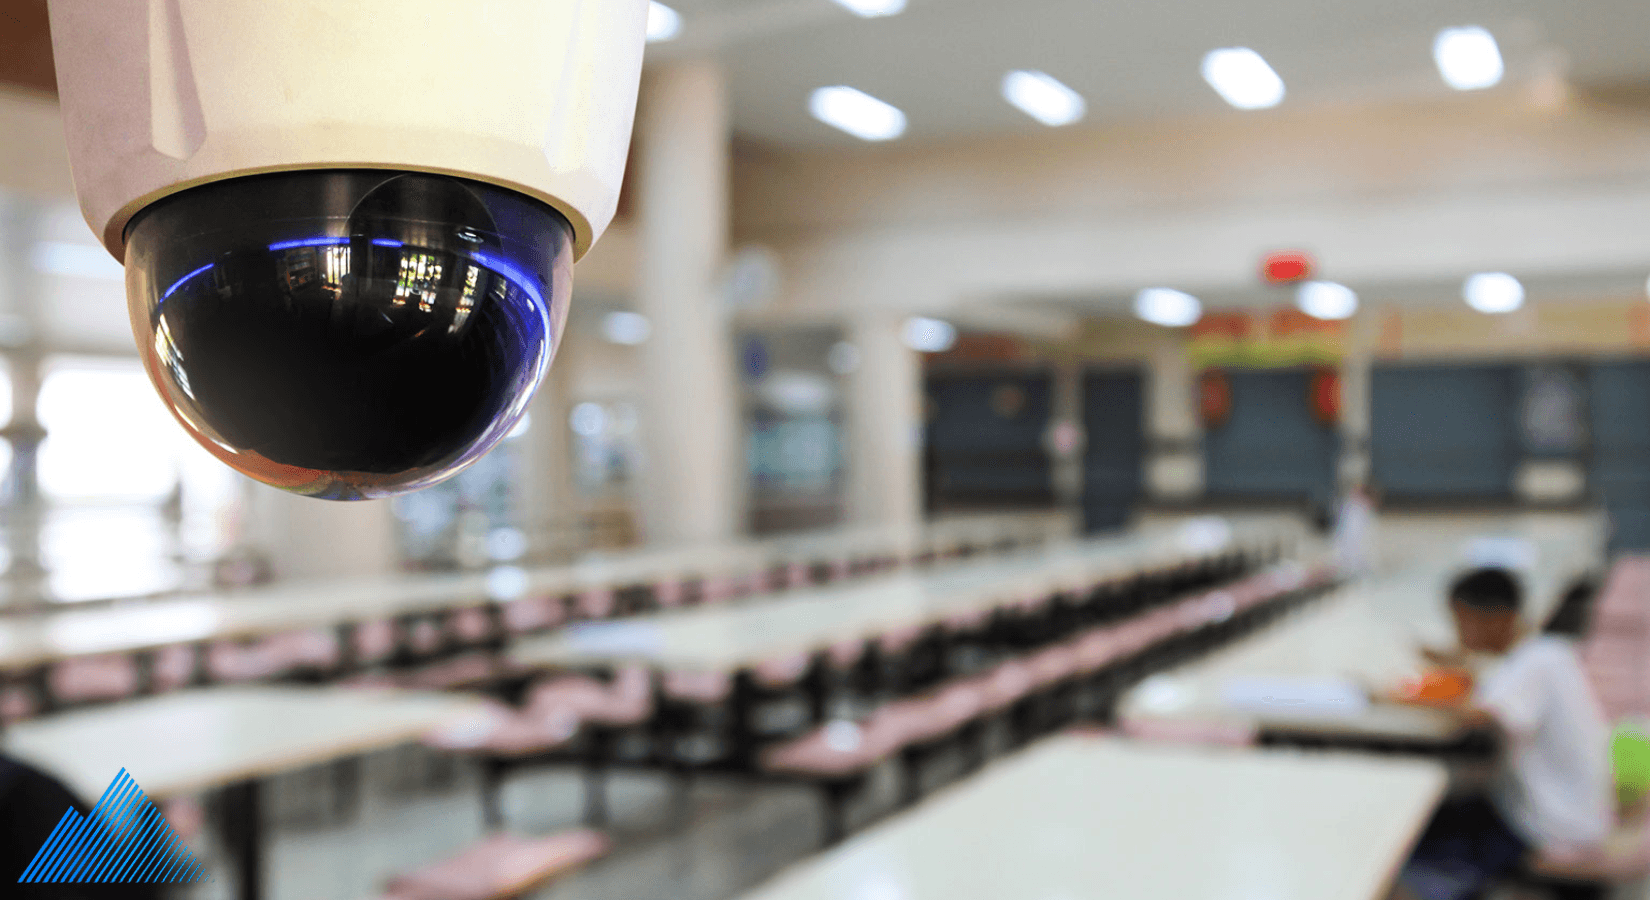 Dome security camera mounted on ceiling in a school cafeteria